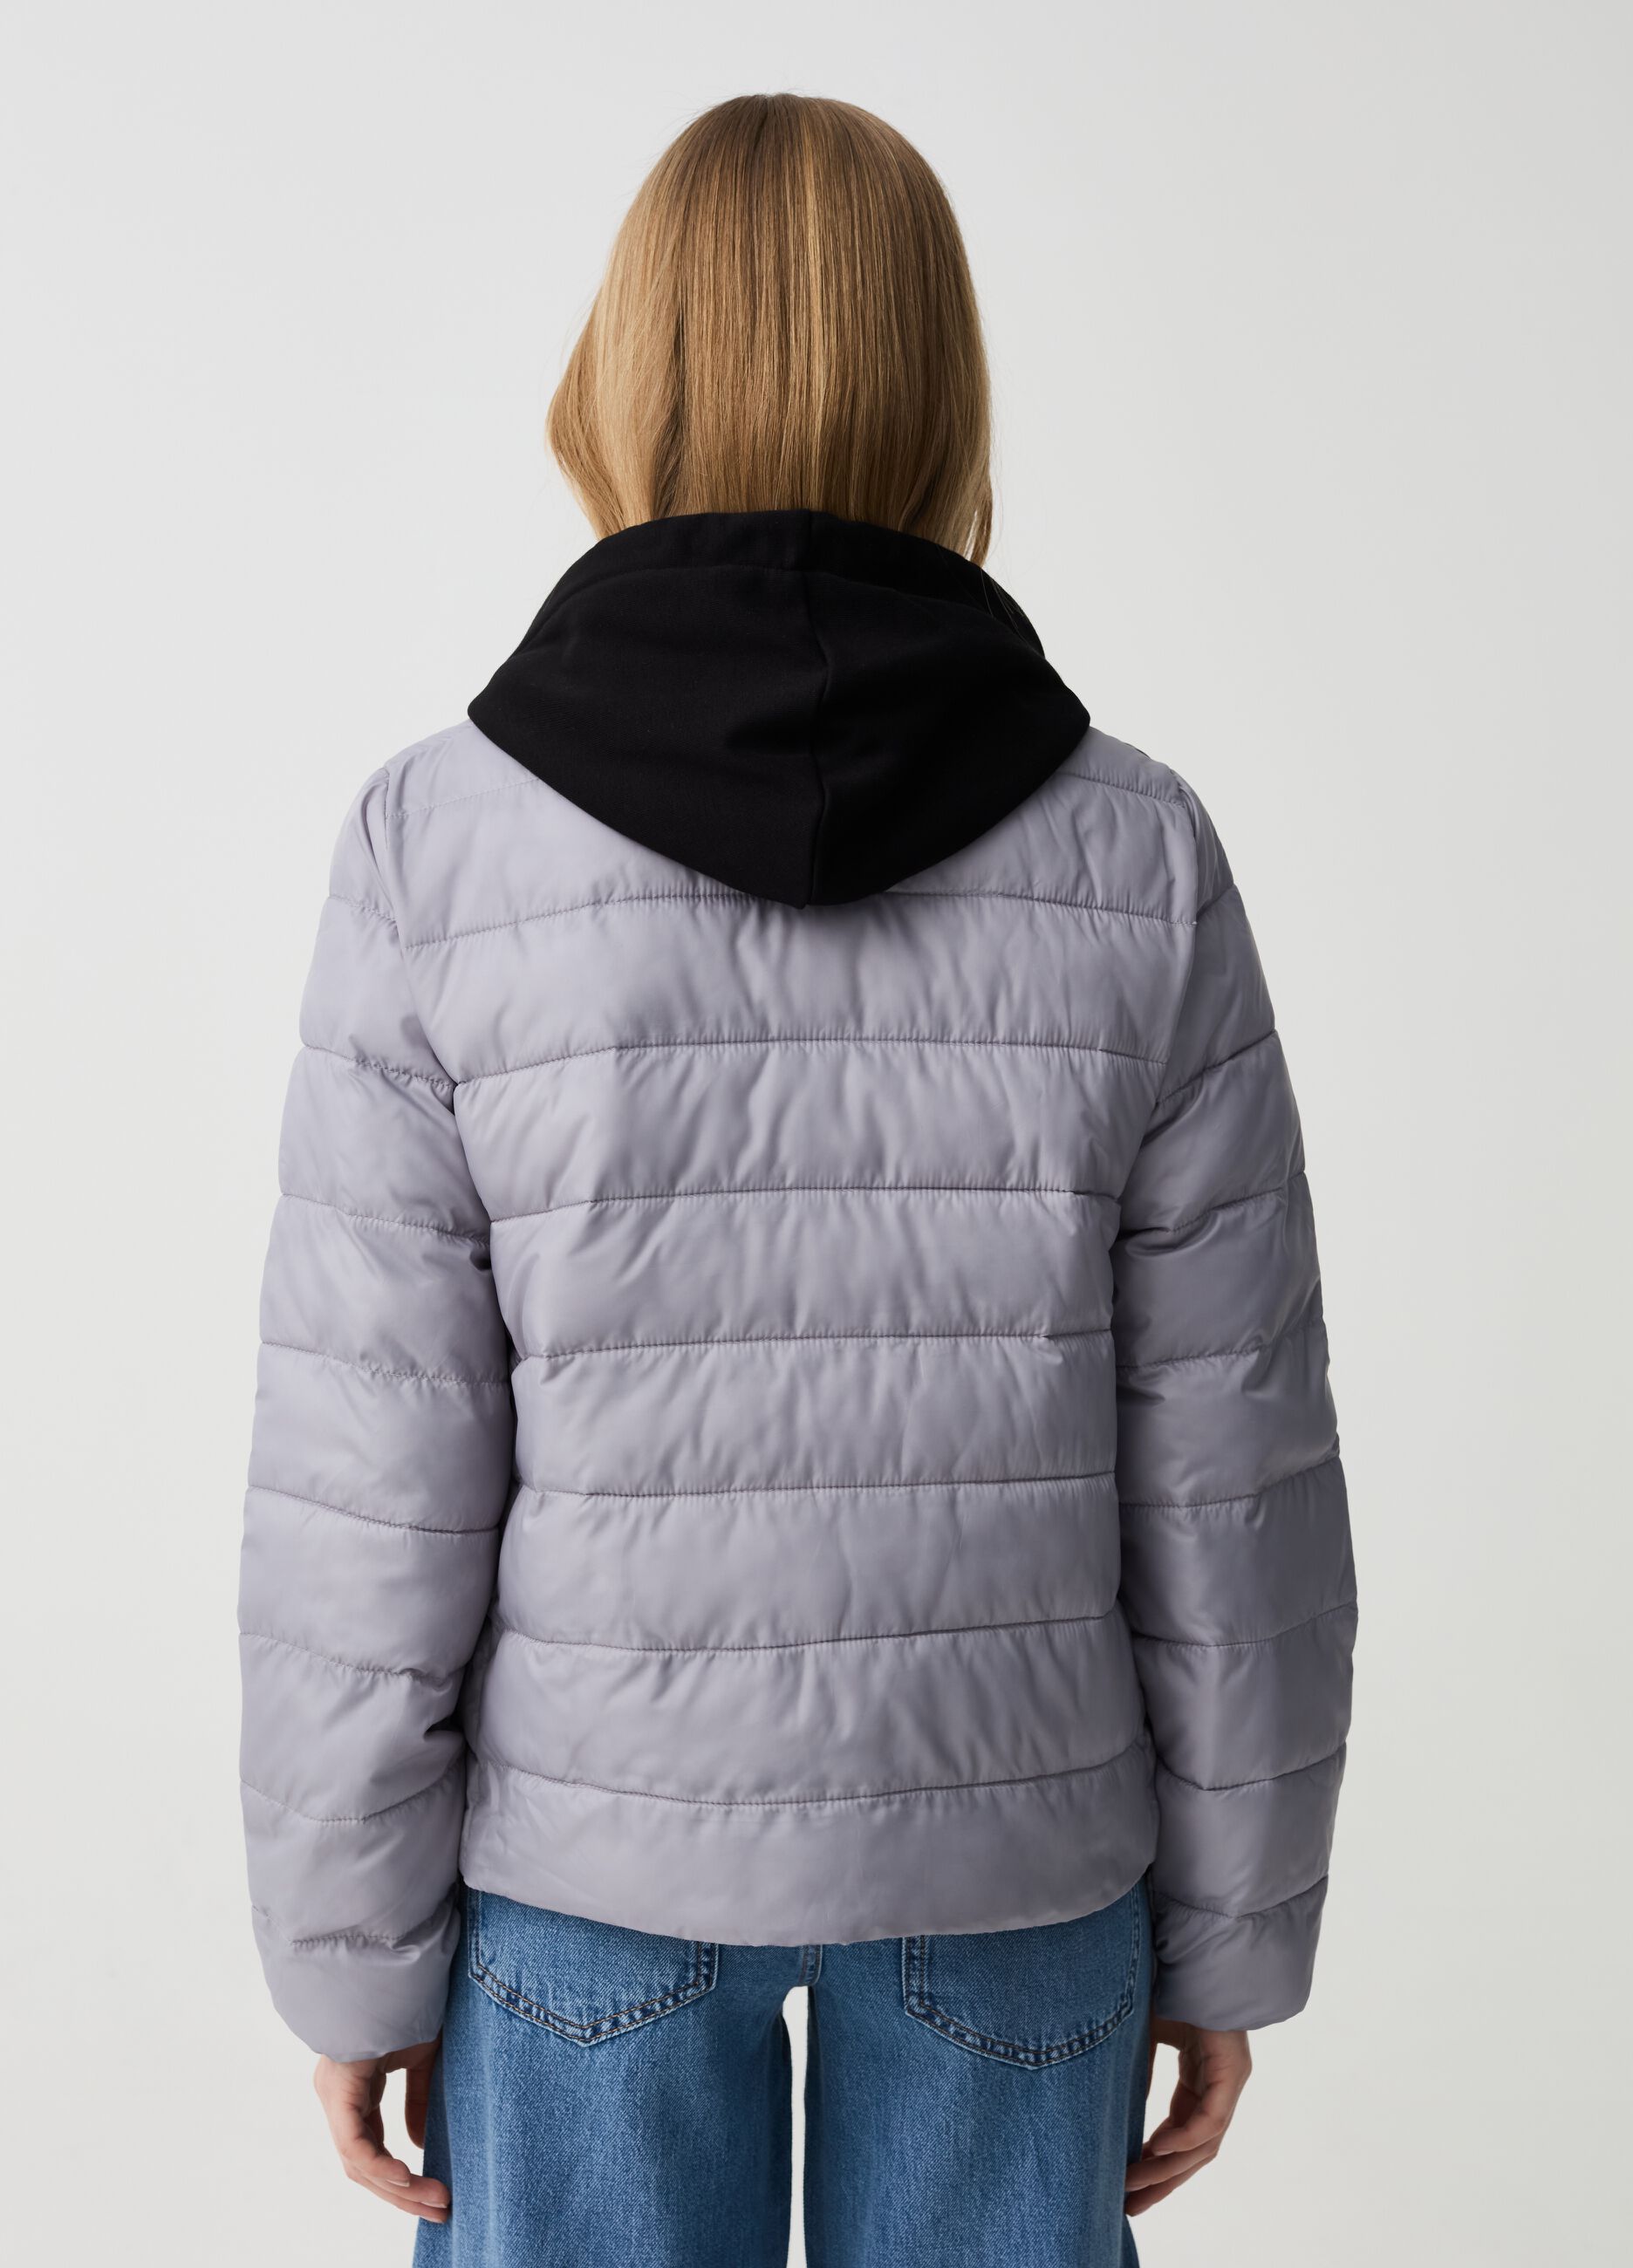 Essential ultralight down jacket with high neck